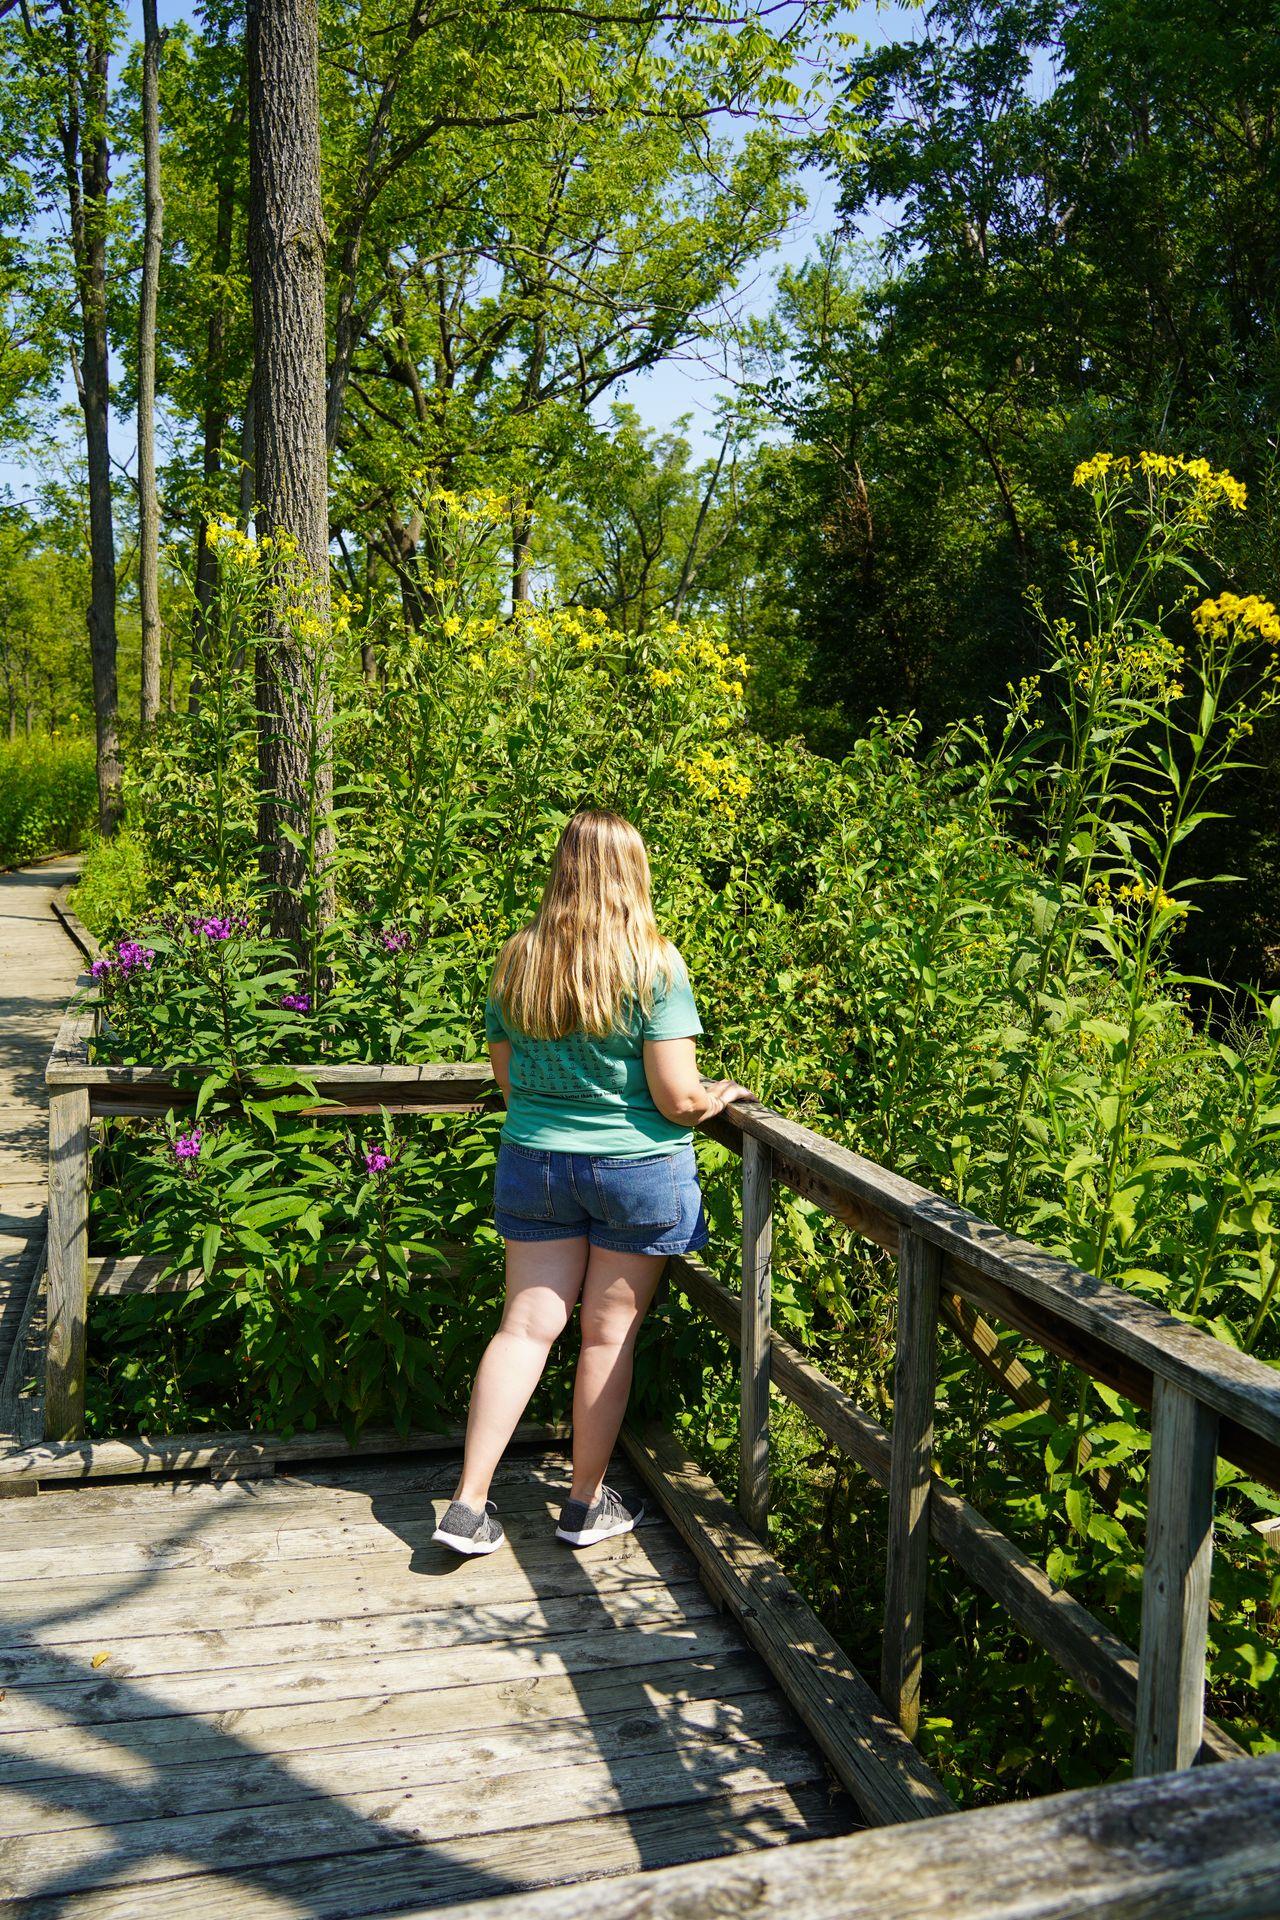 Lydia gazing out at a view of greenery and flowers in the Millbrook Marsh Nature Center